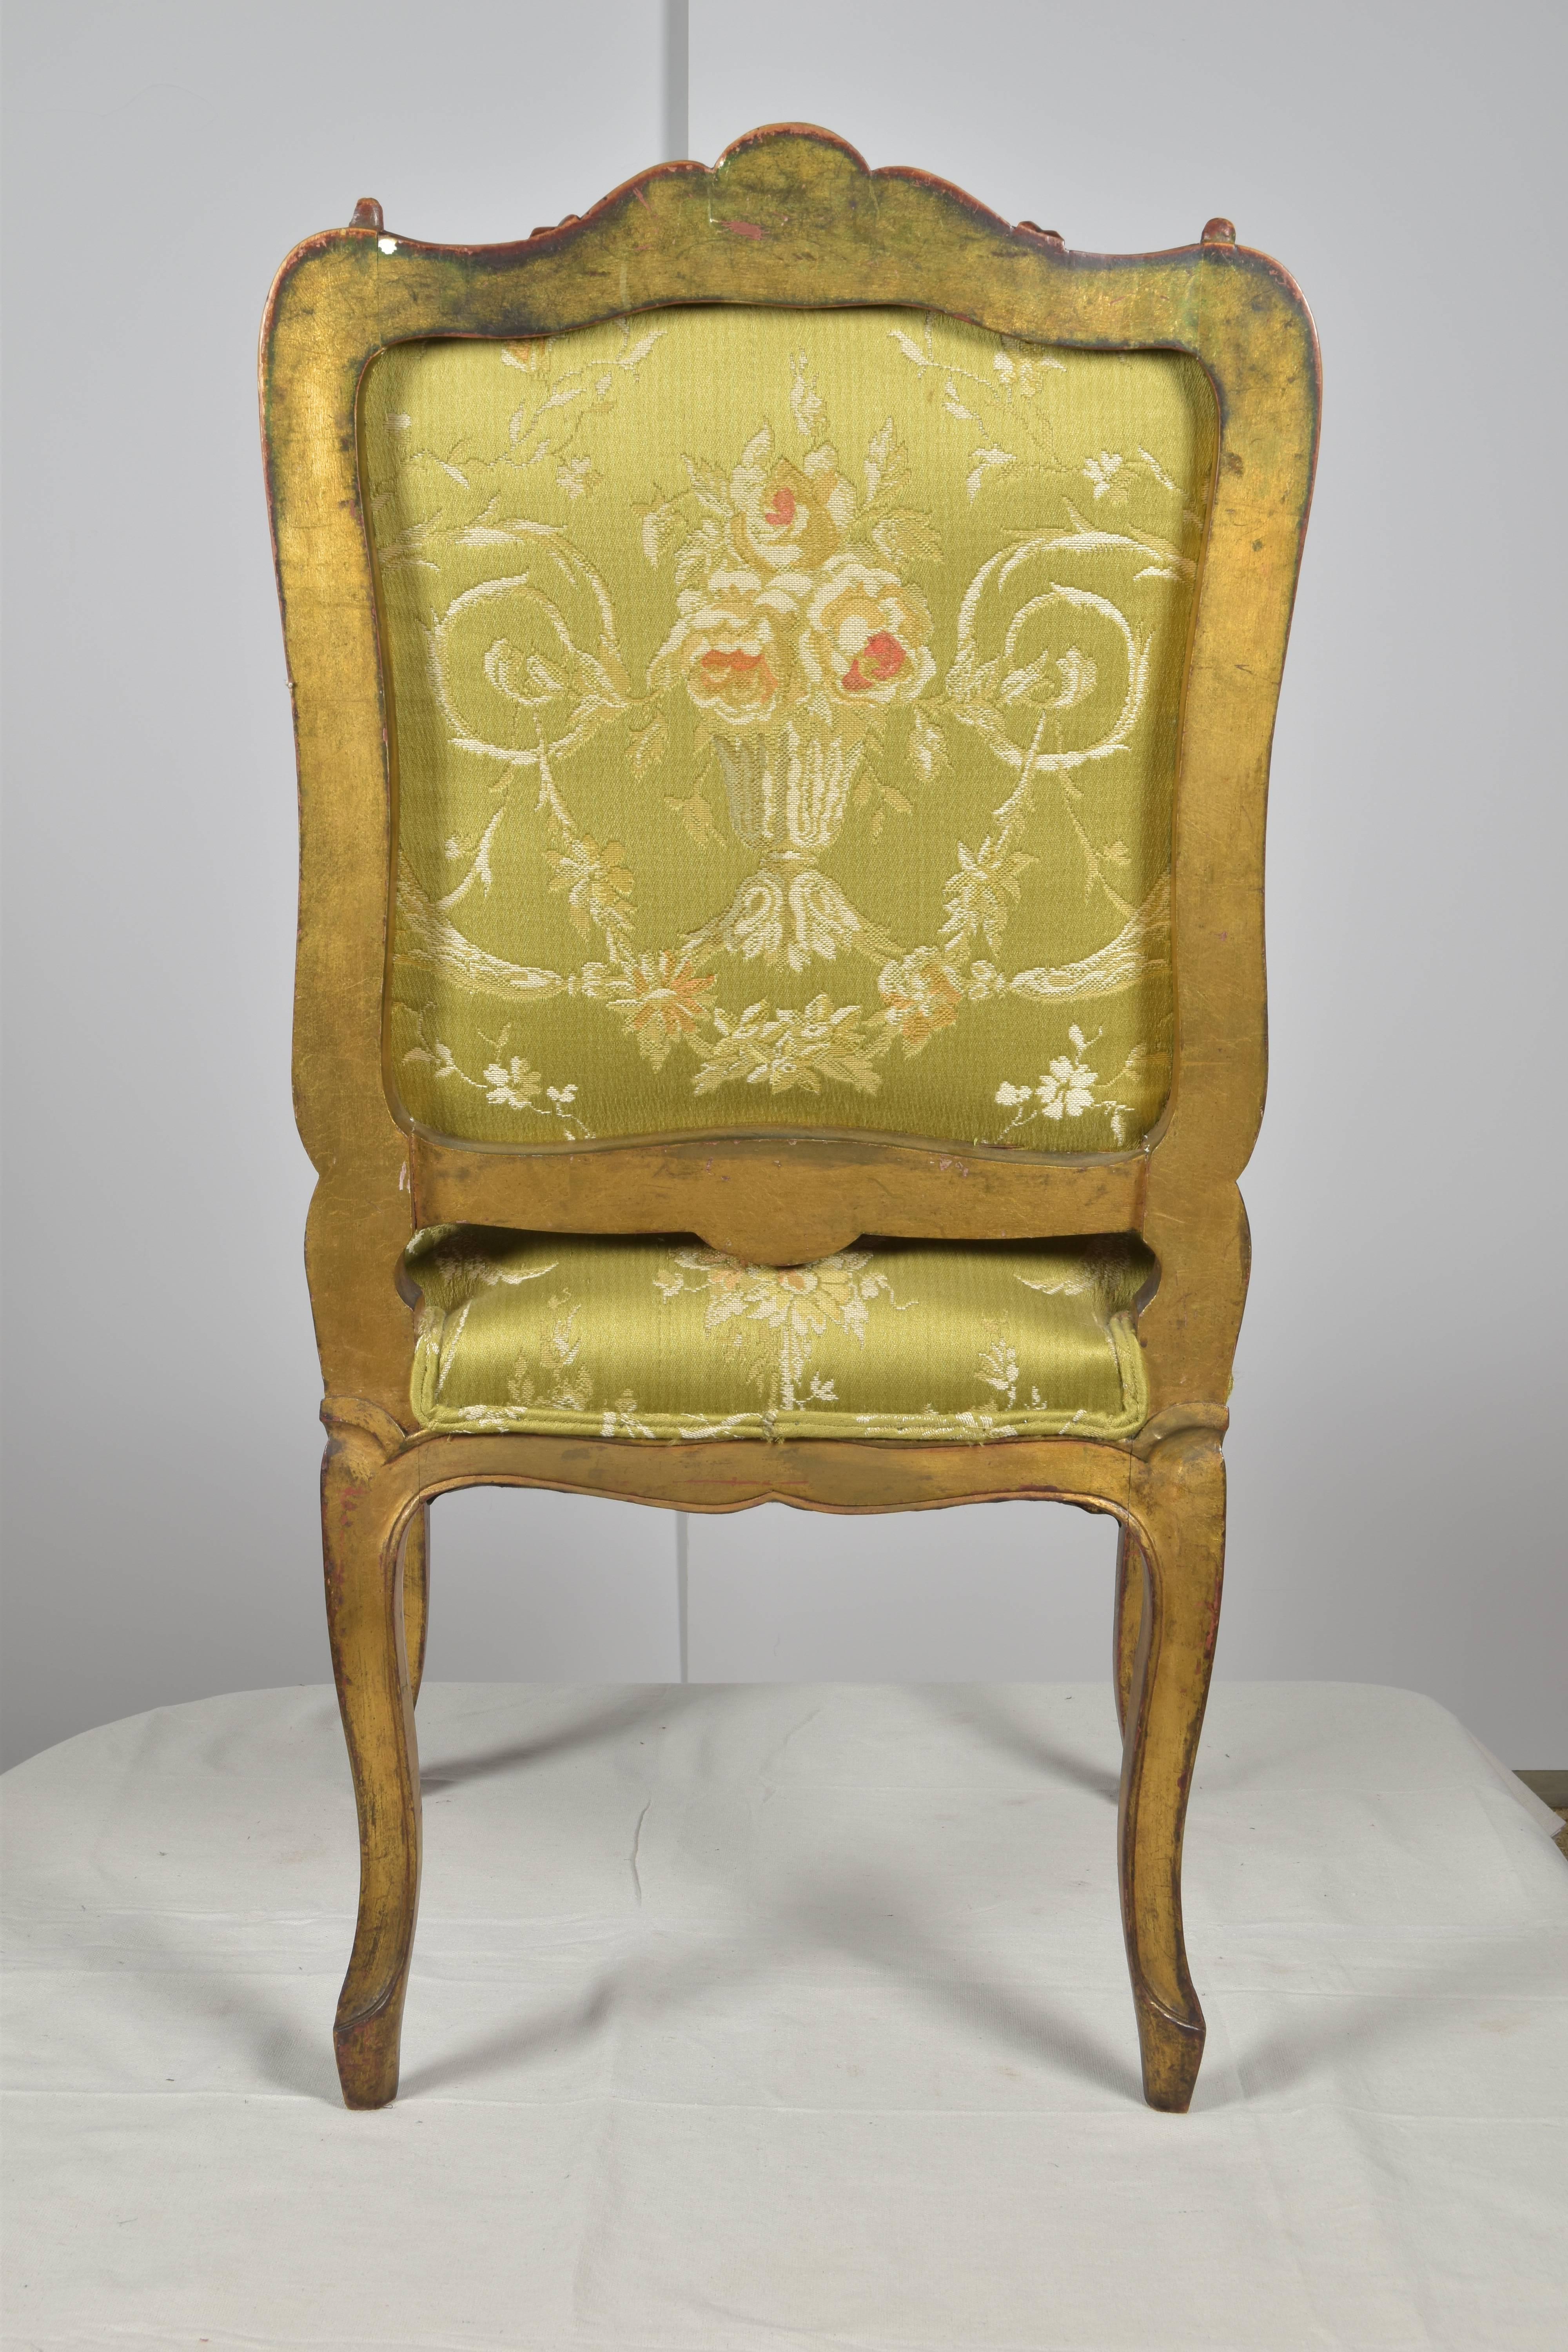 French Provincial 19th Century French Giltwood Chair